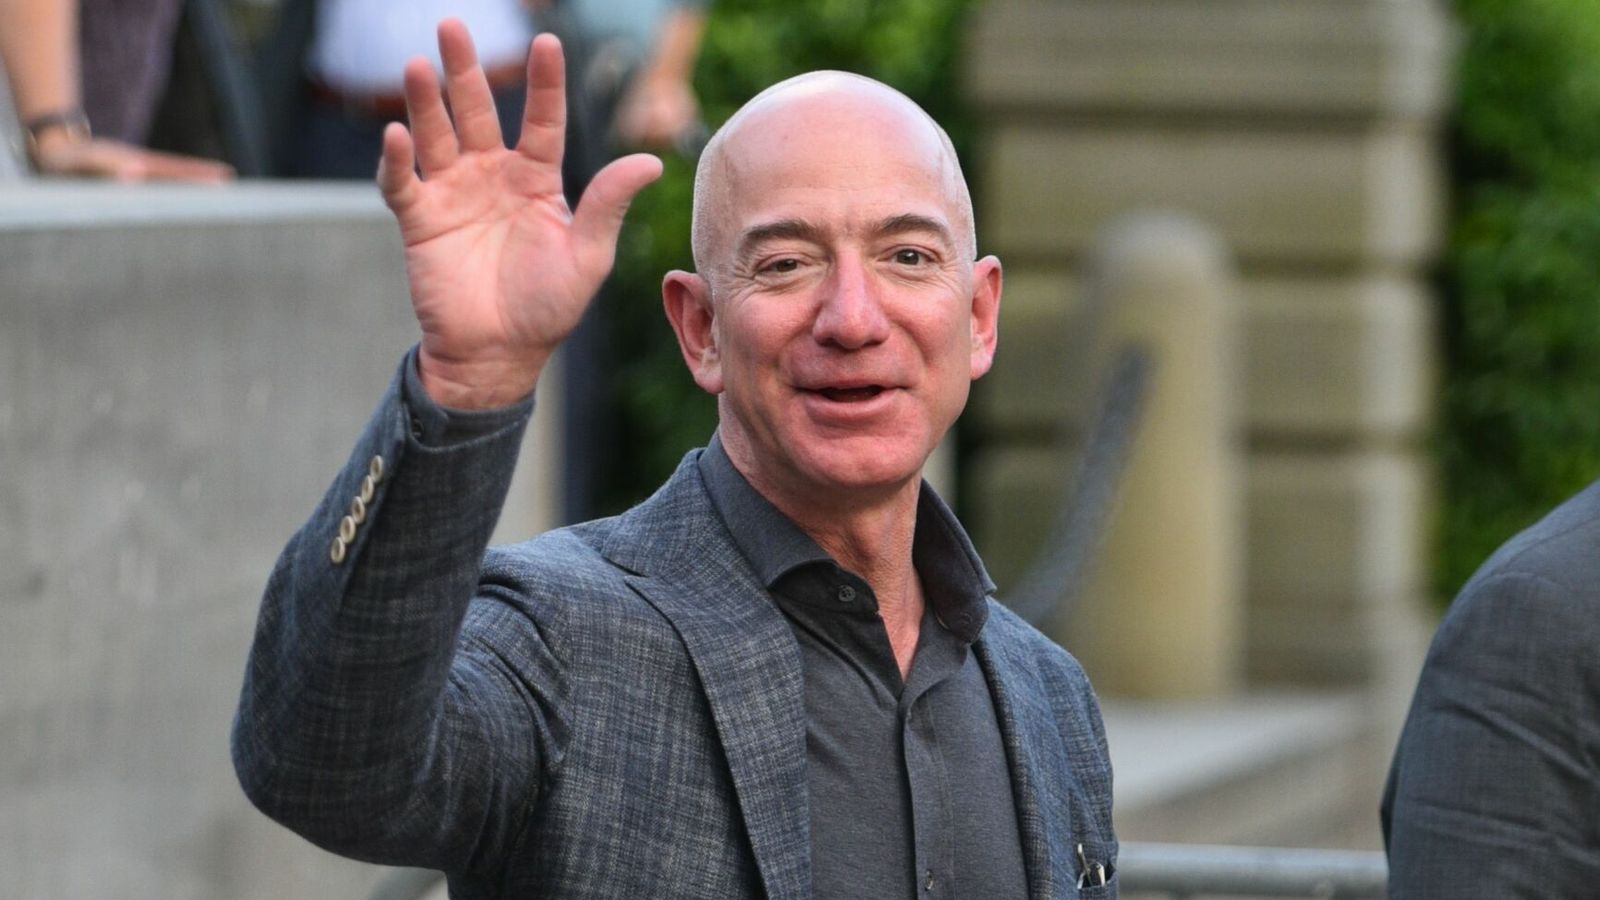 bogus rags to riches - jeff bezos stepping down as amazon ceo - 00000